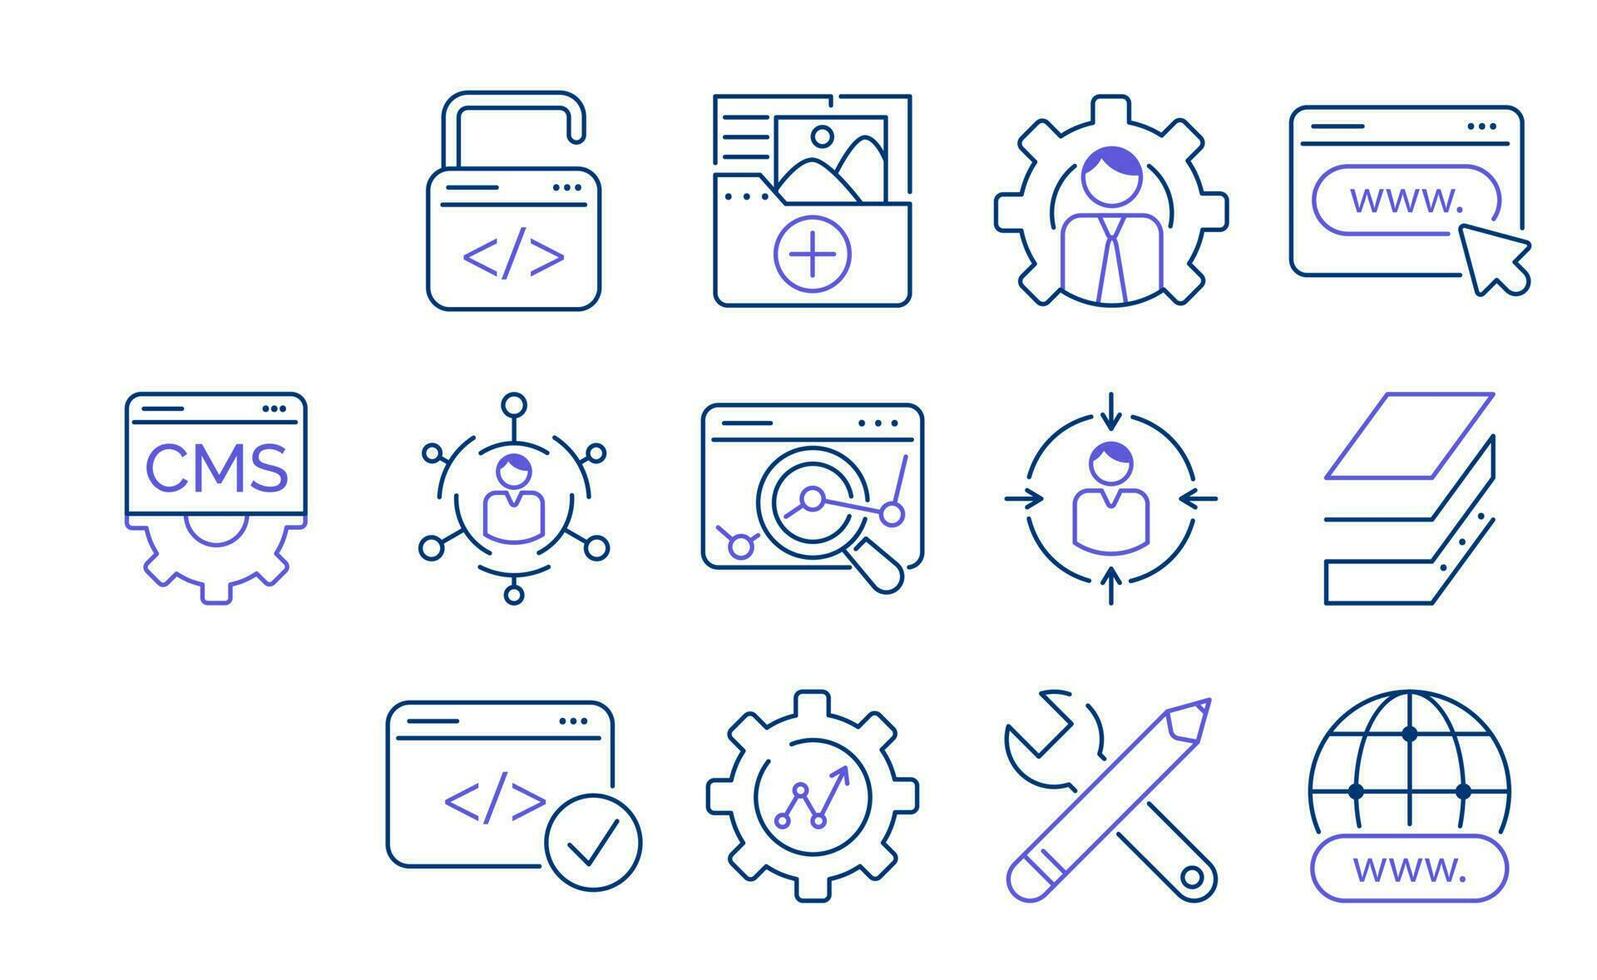 Content Management System set icons. Creation, publishing content, blog promotion, database administration, seo optimization, analysis, setting, support. Network internet technology for web business vector